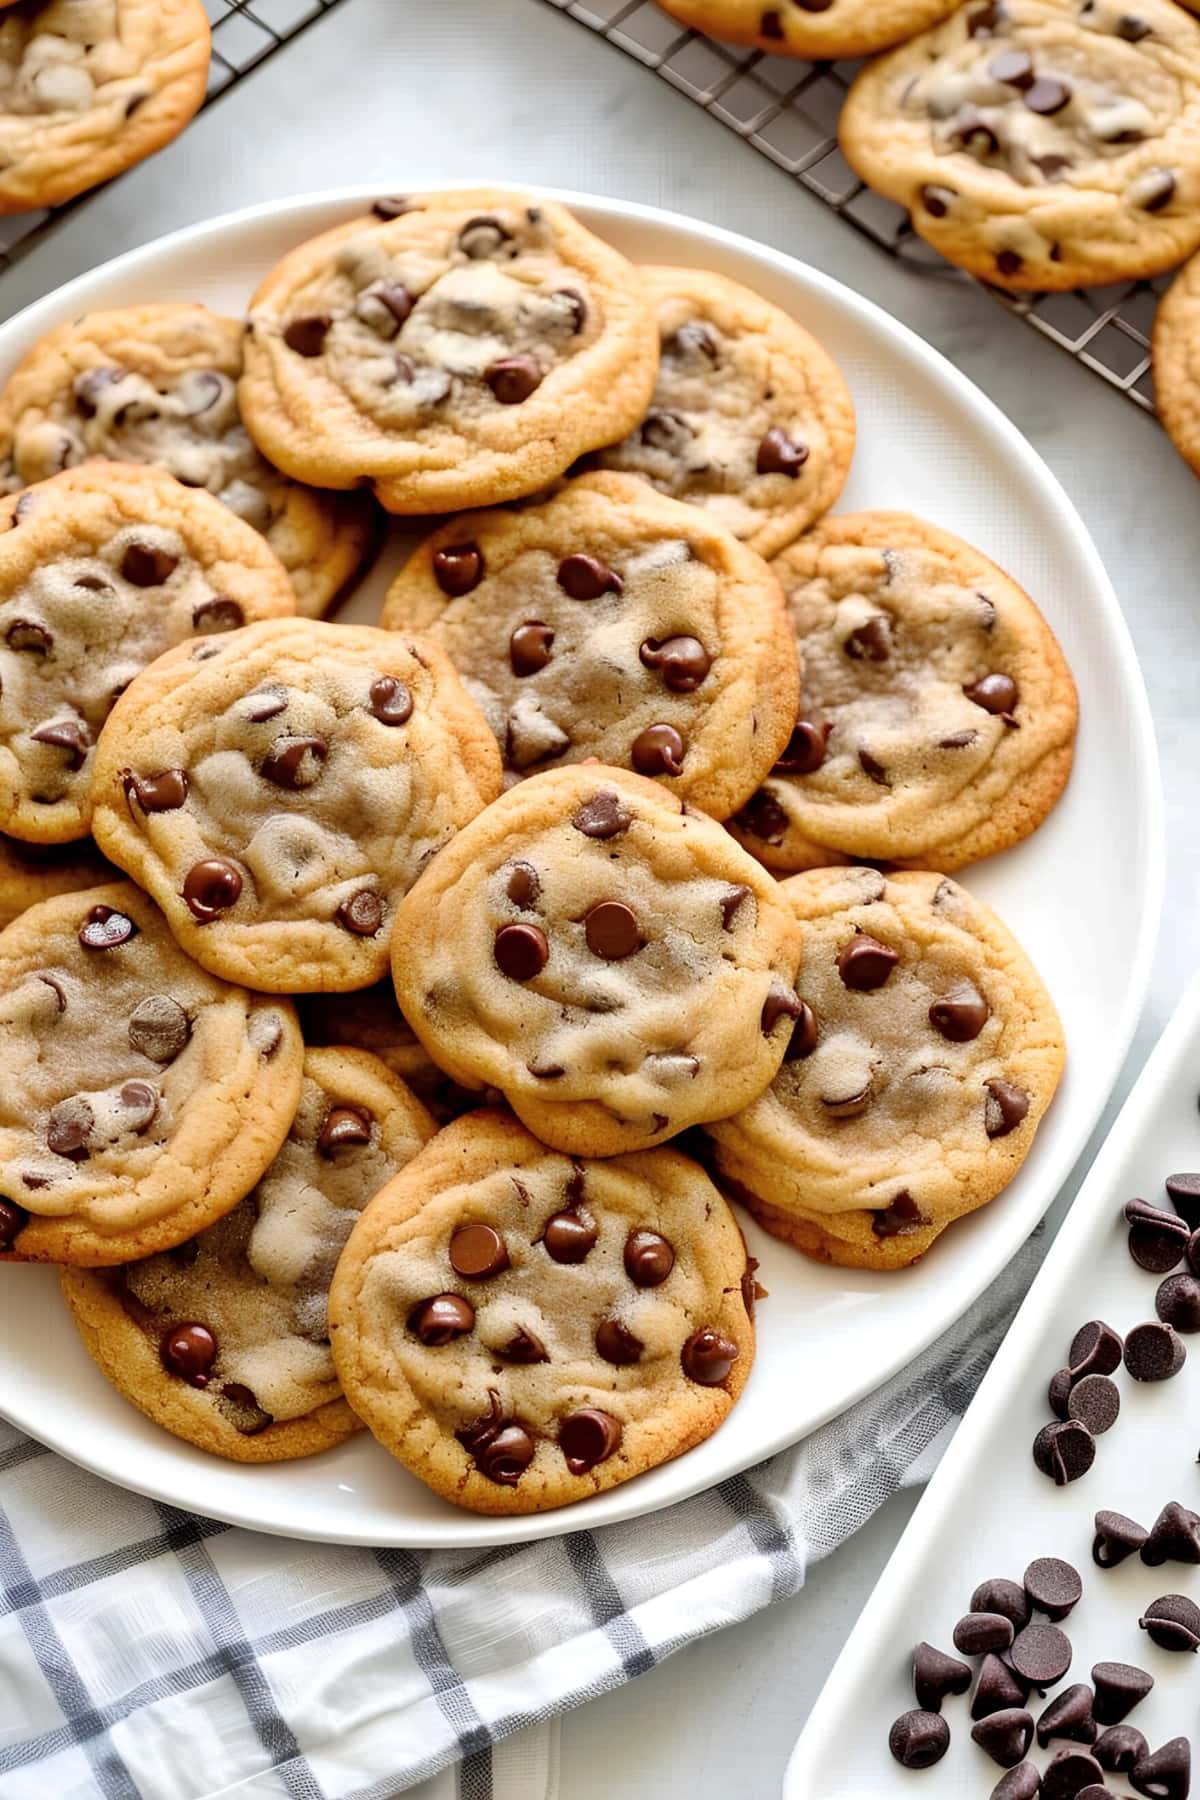 Homemade sweet and chewy chocolate chip cookies in a white plate